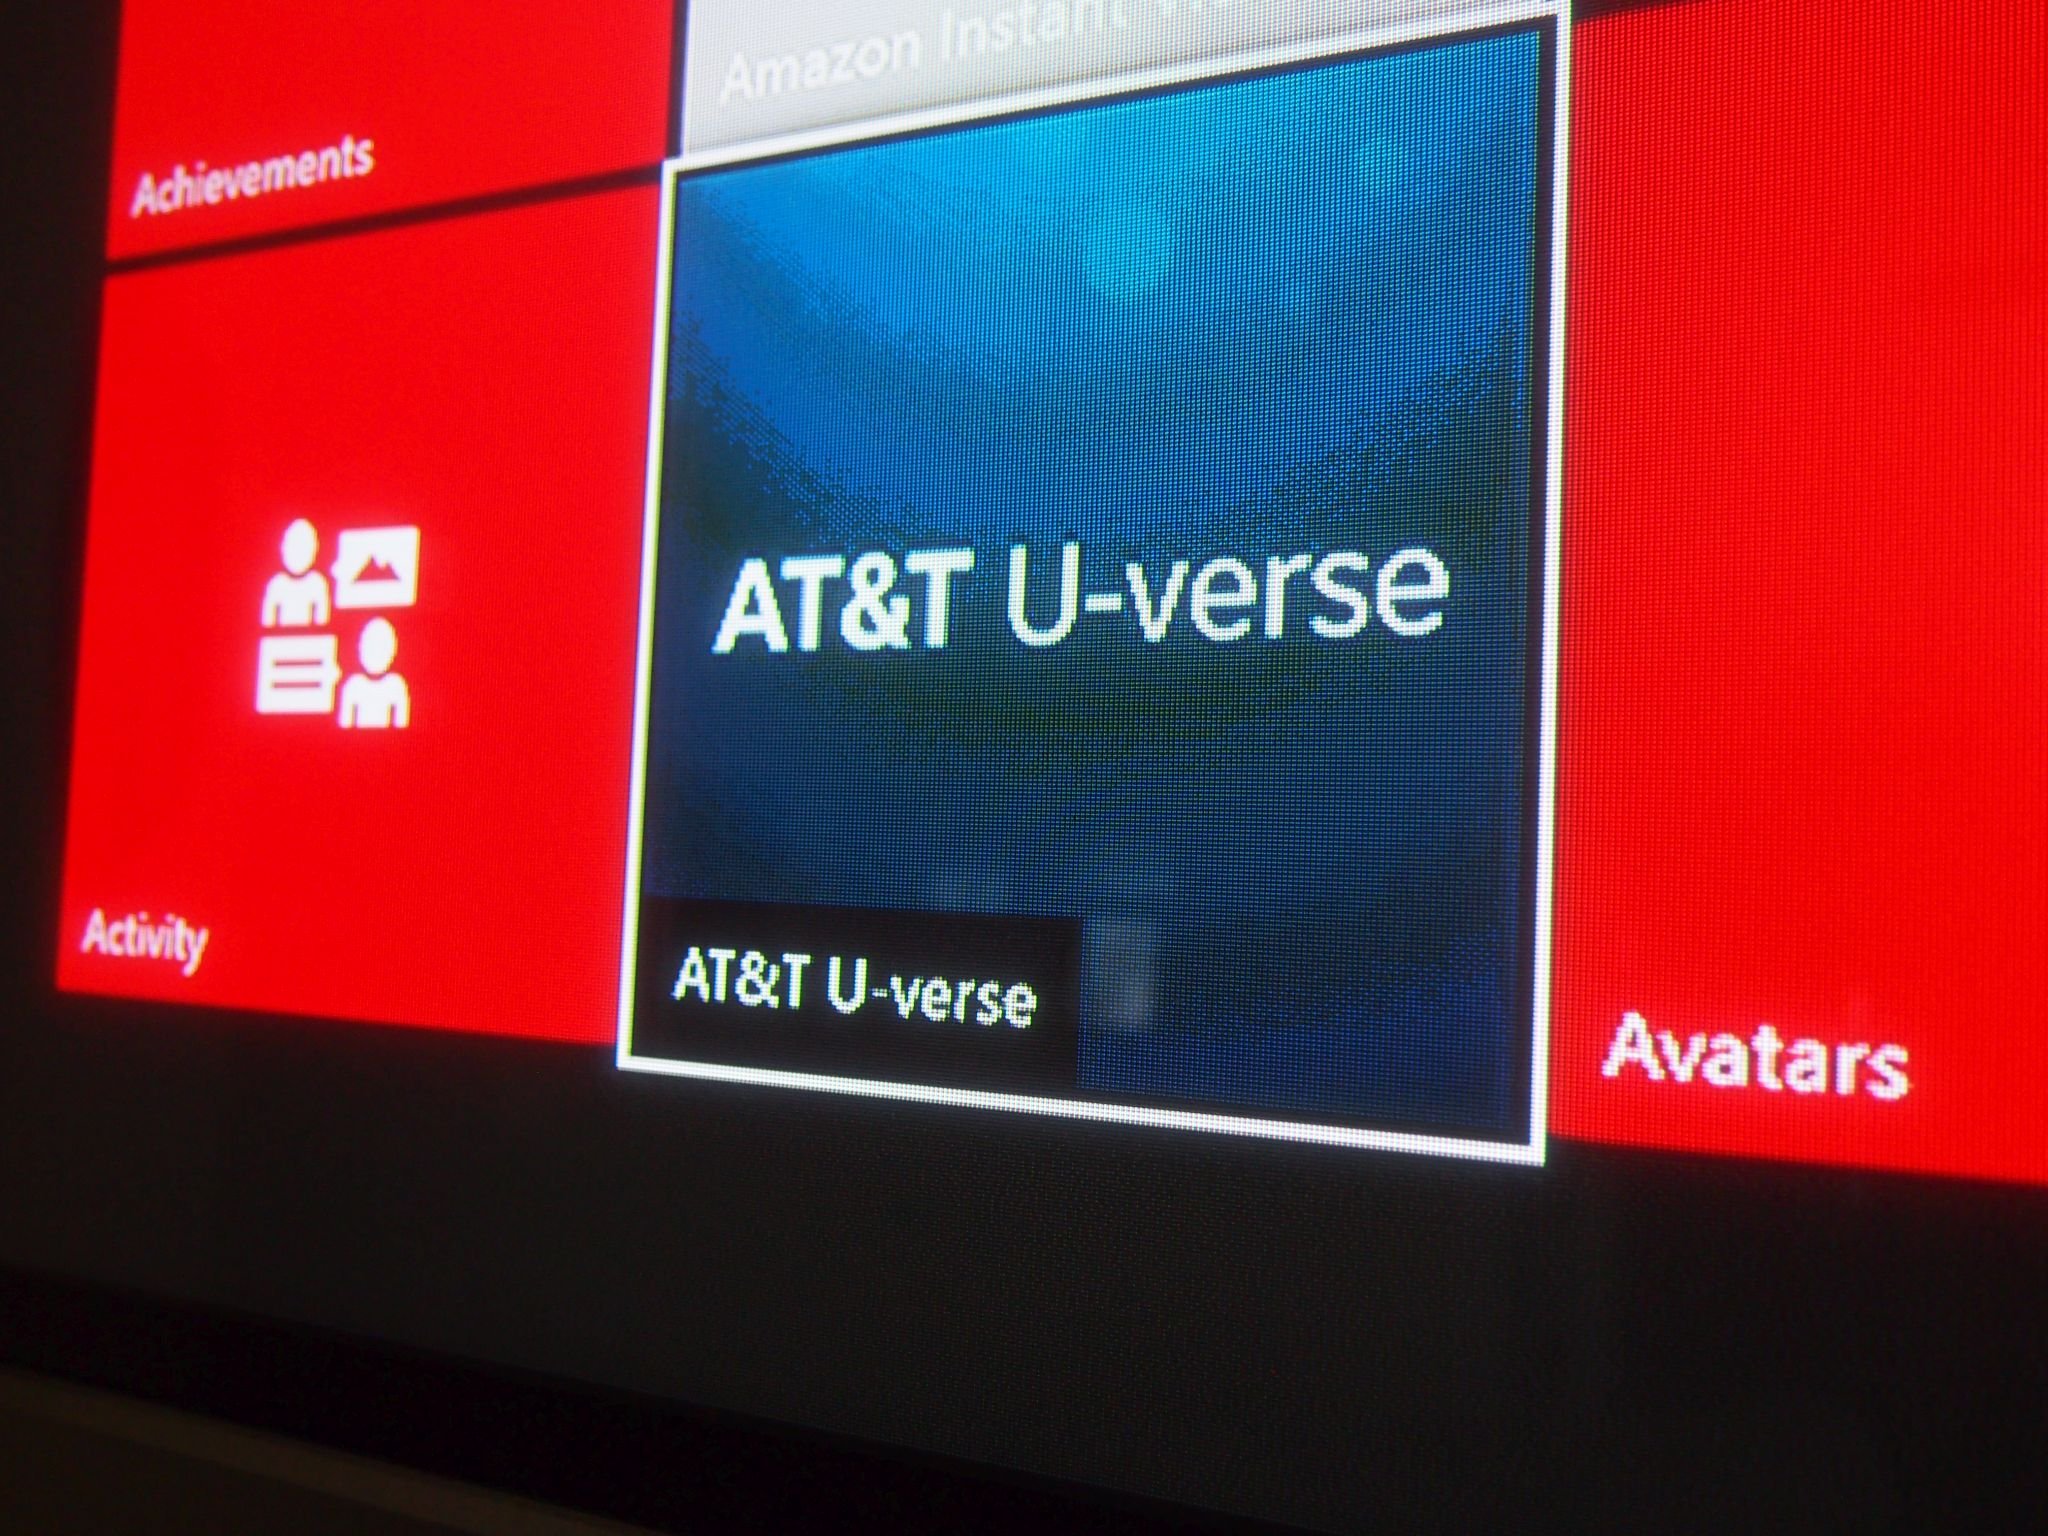 AT&T Uverse customers now have their own Xbox One app